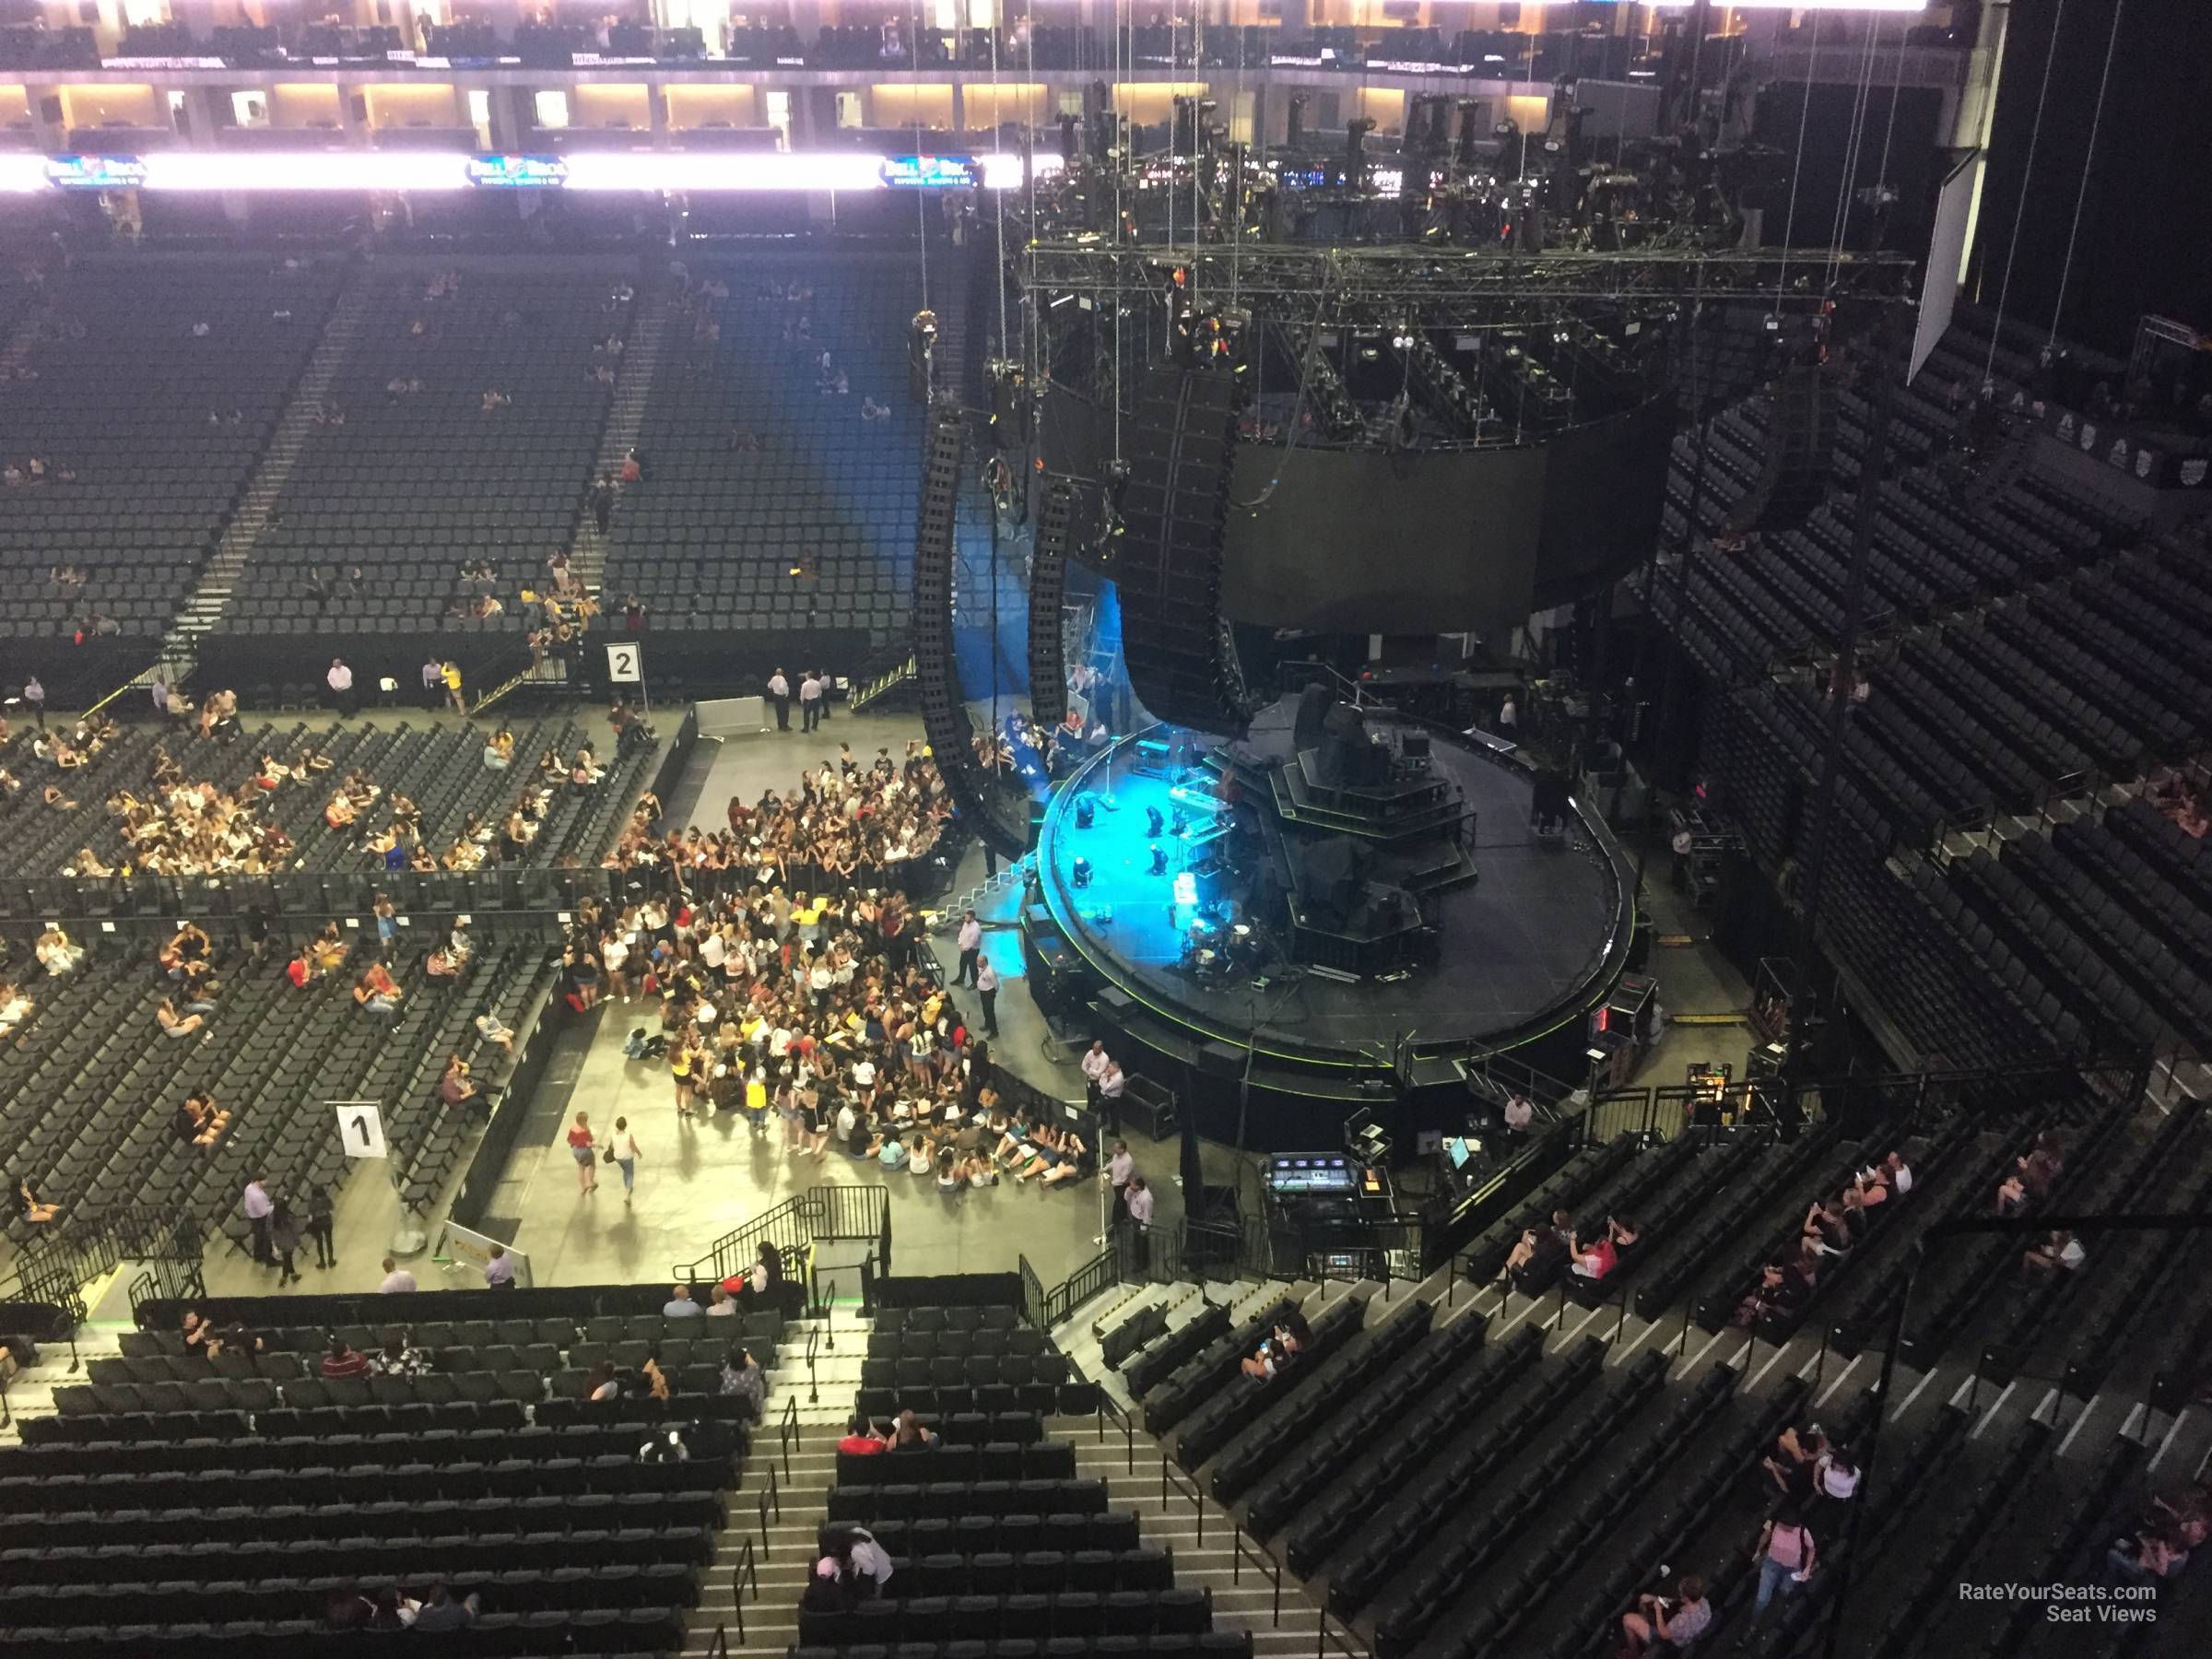 Section 204 at Golden 1 Center